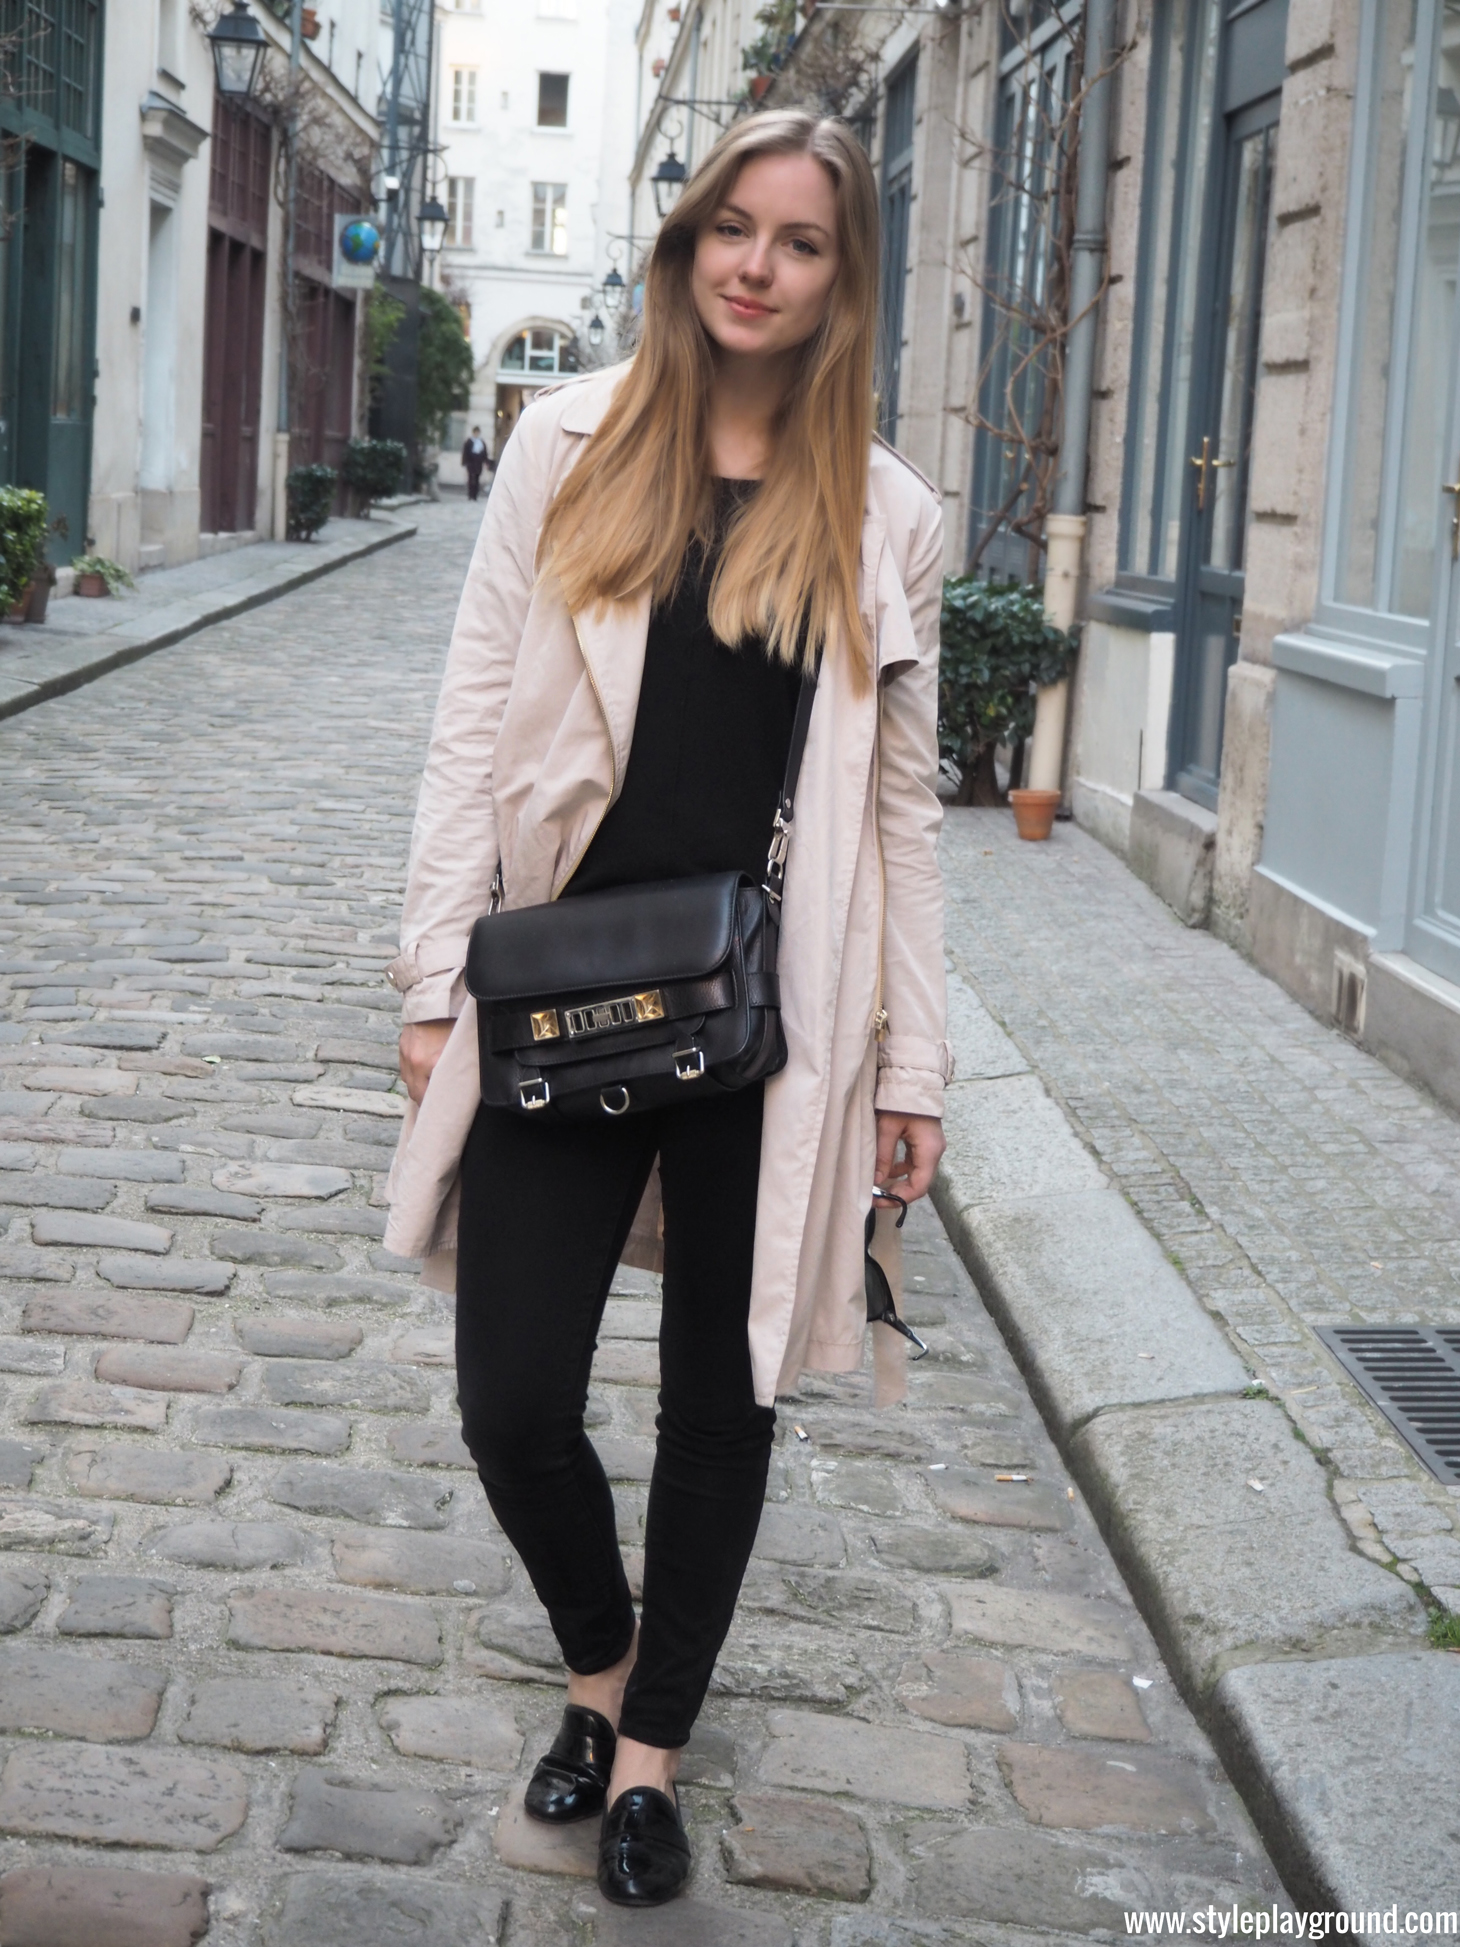 Axelle Blanpain of Style playground is wearing a Mango trench, J Brand skinny jeans, Repetto loafers & Proenza Schouler bag. 